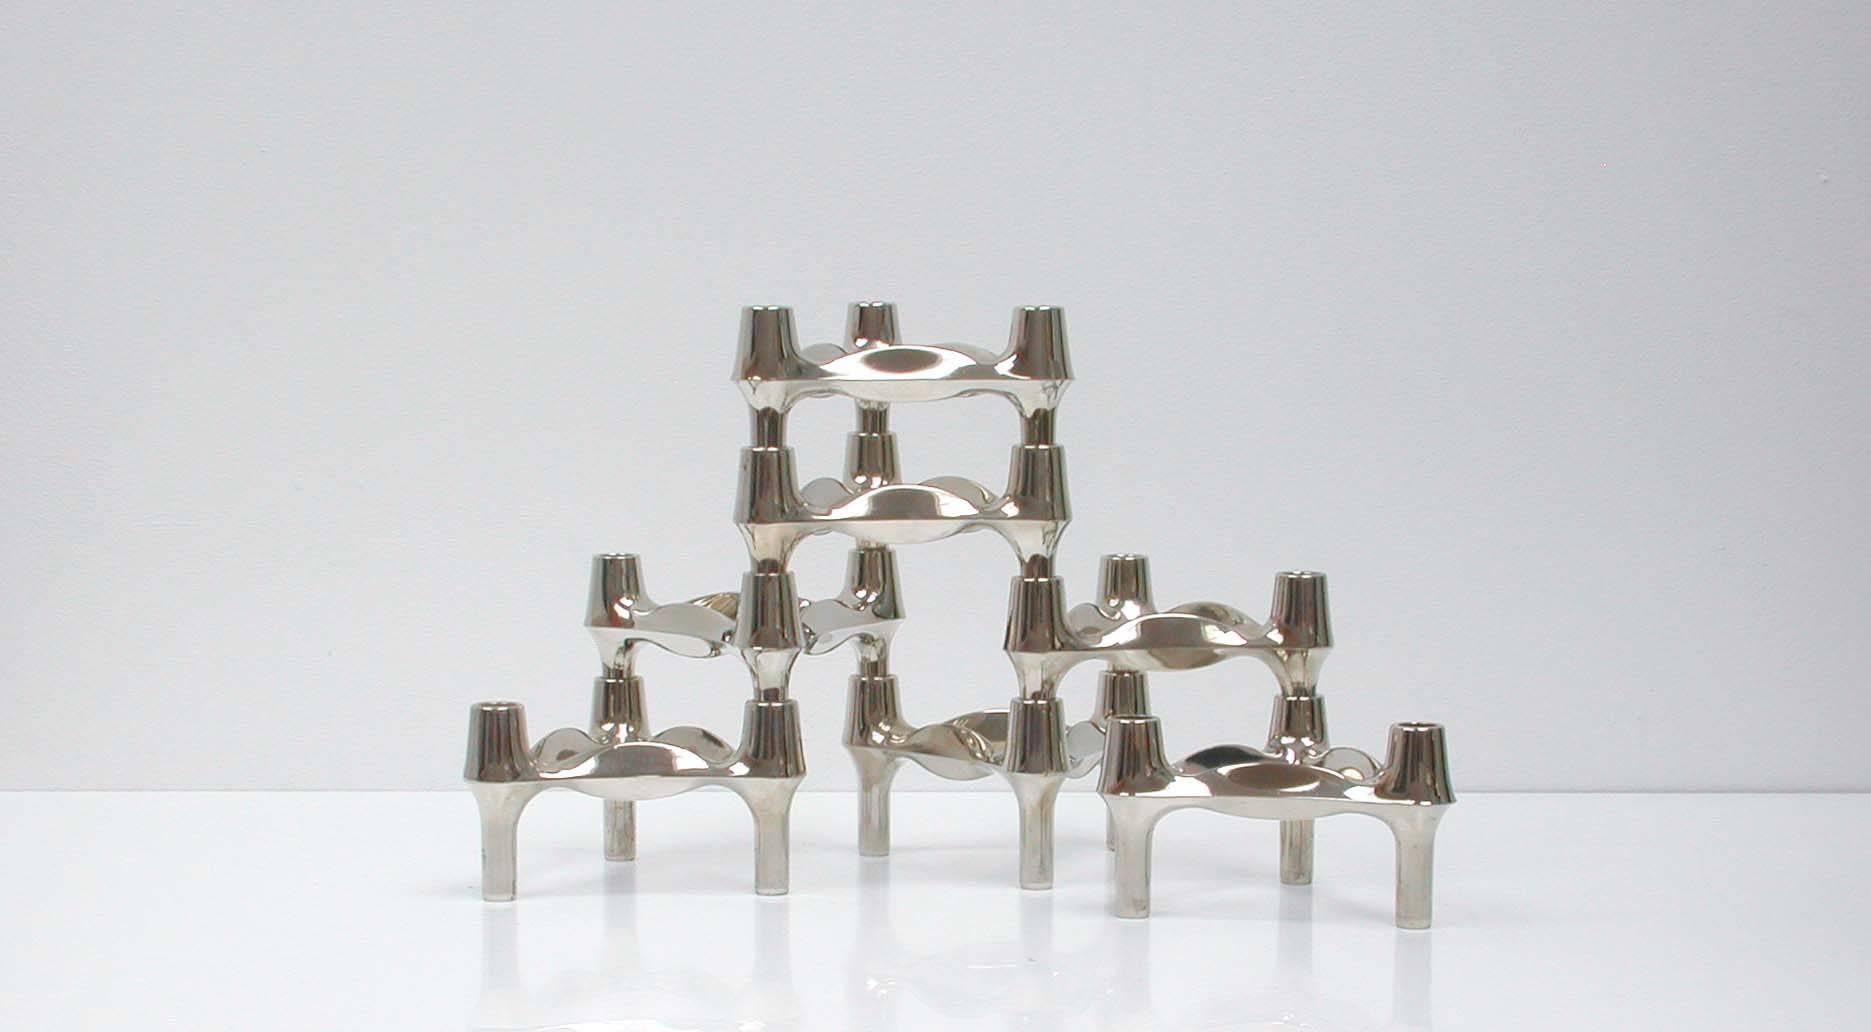 Unusual set of seven midcentury modular triangle shaped chrome candle holders by BMF. Made in Germany in the 1960s. The candleholders can be stacked in whichever design you wish with as many candles you would like.

Design by Caesar